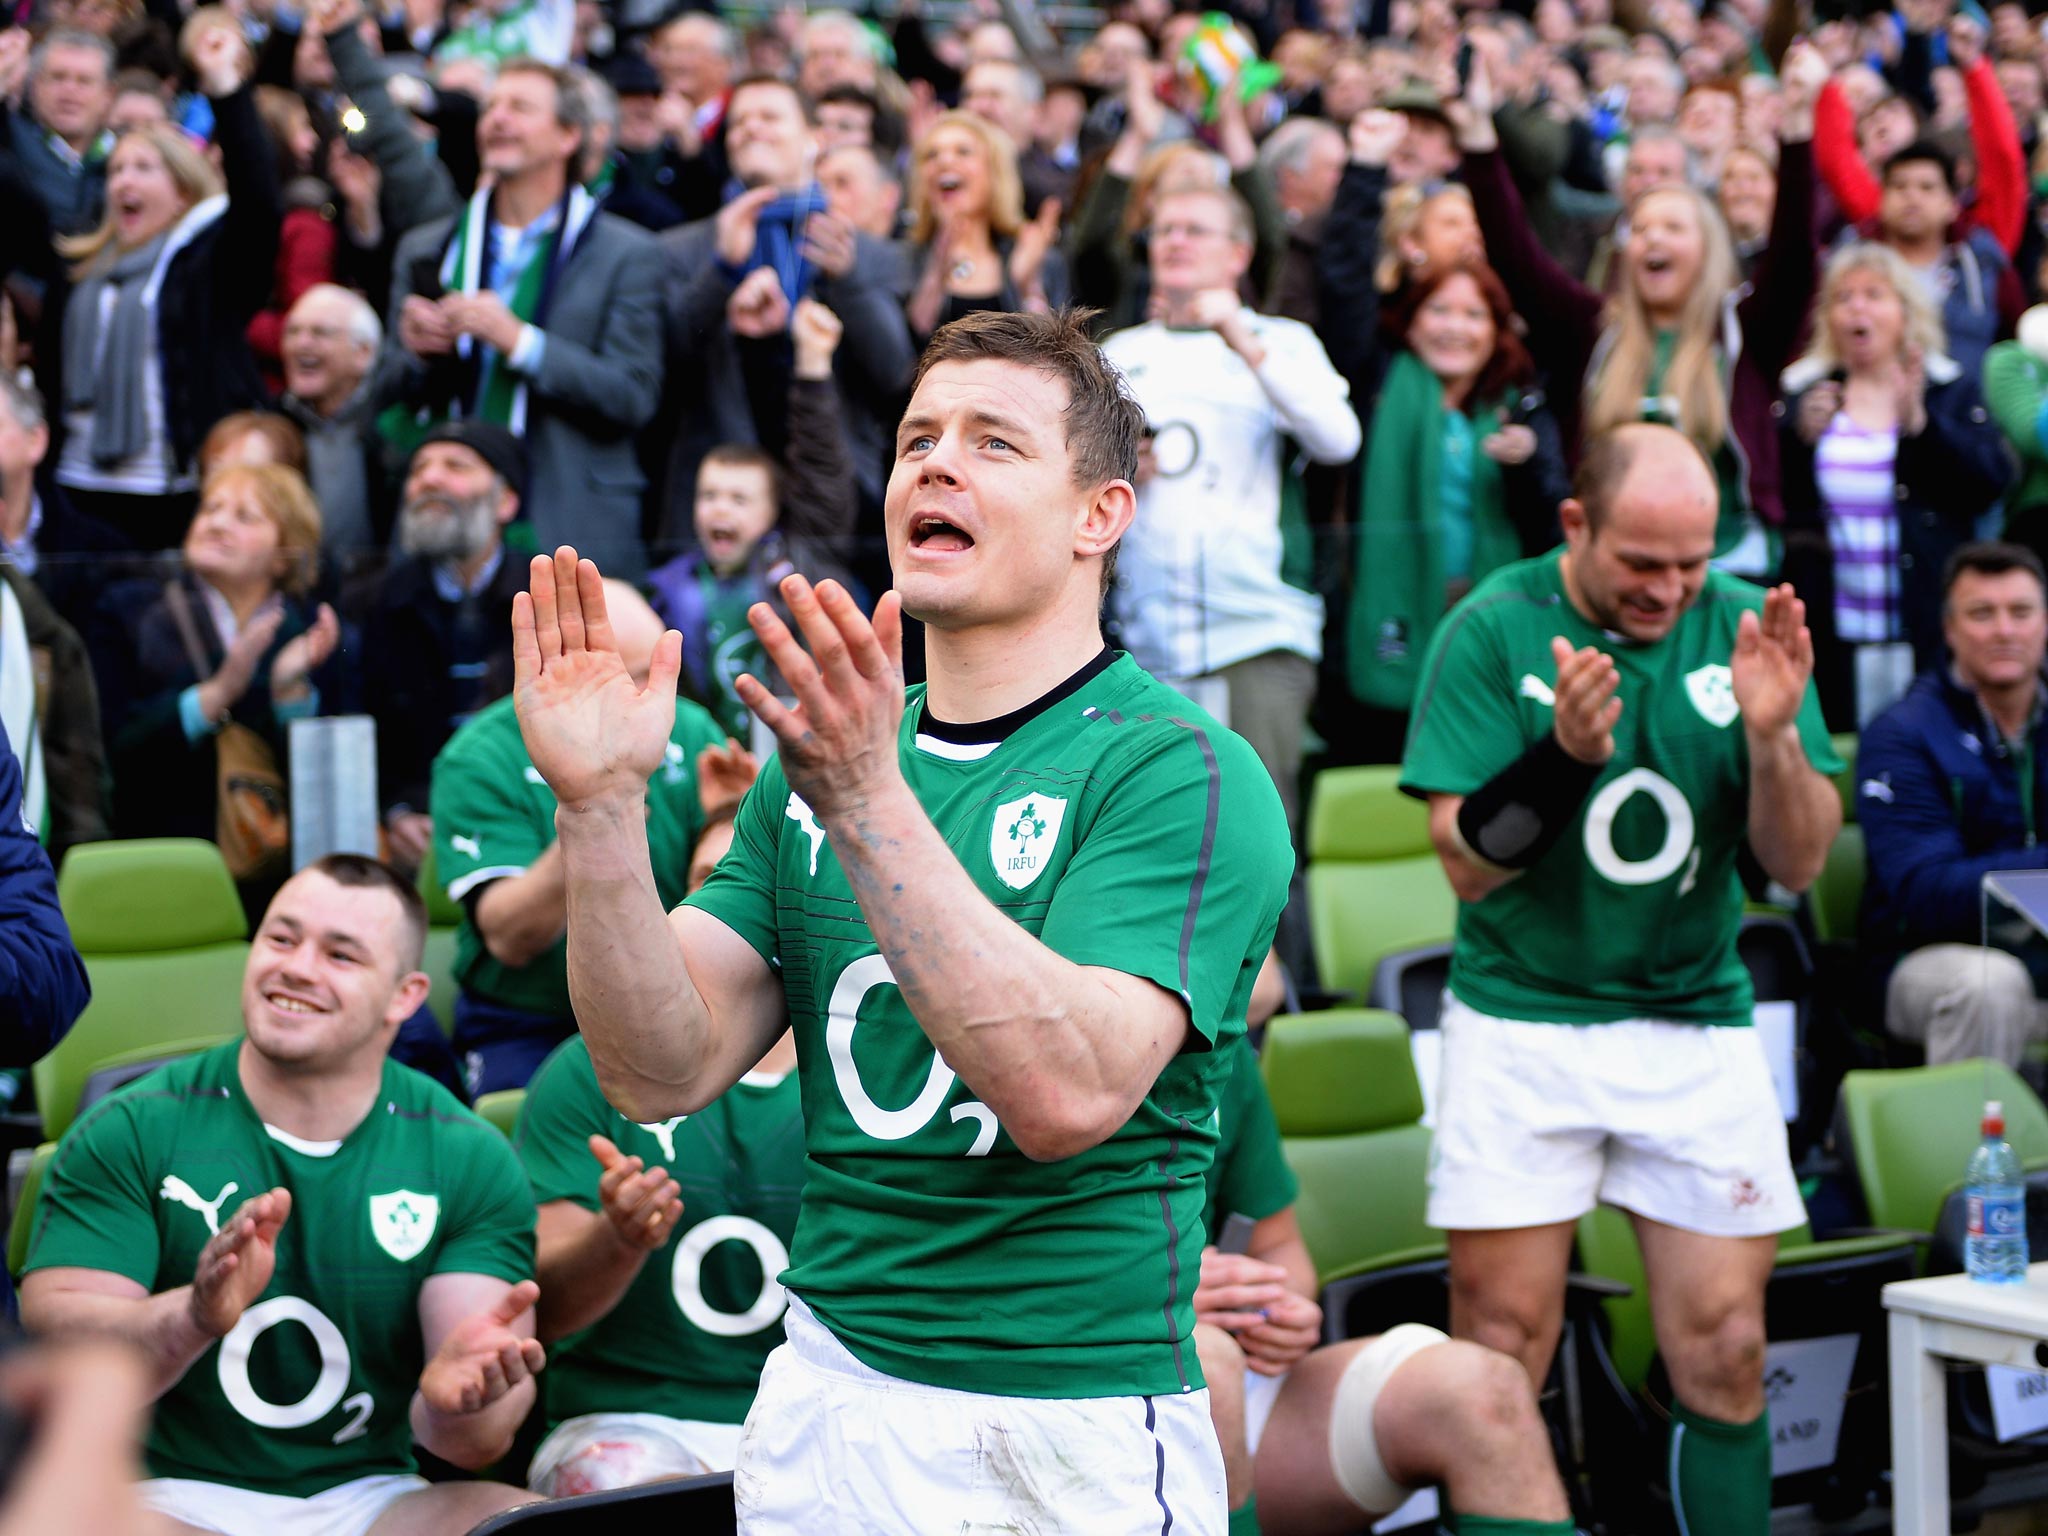 Brian O'Driscoll applauds an Ireland try in his final appearance at the Aviva Stadium